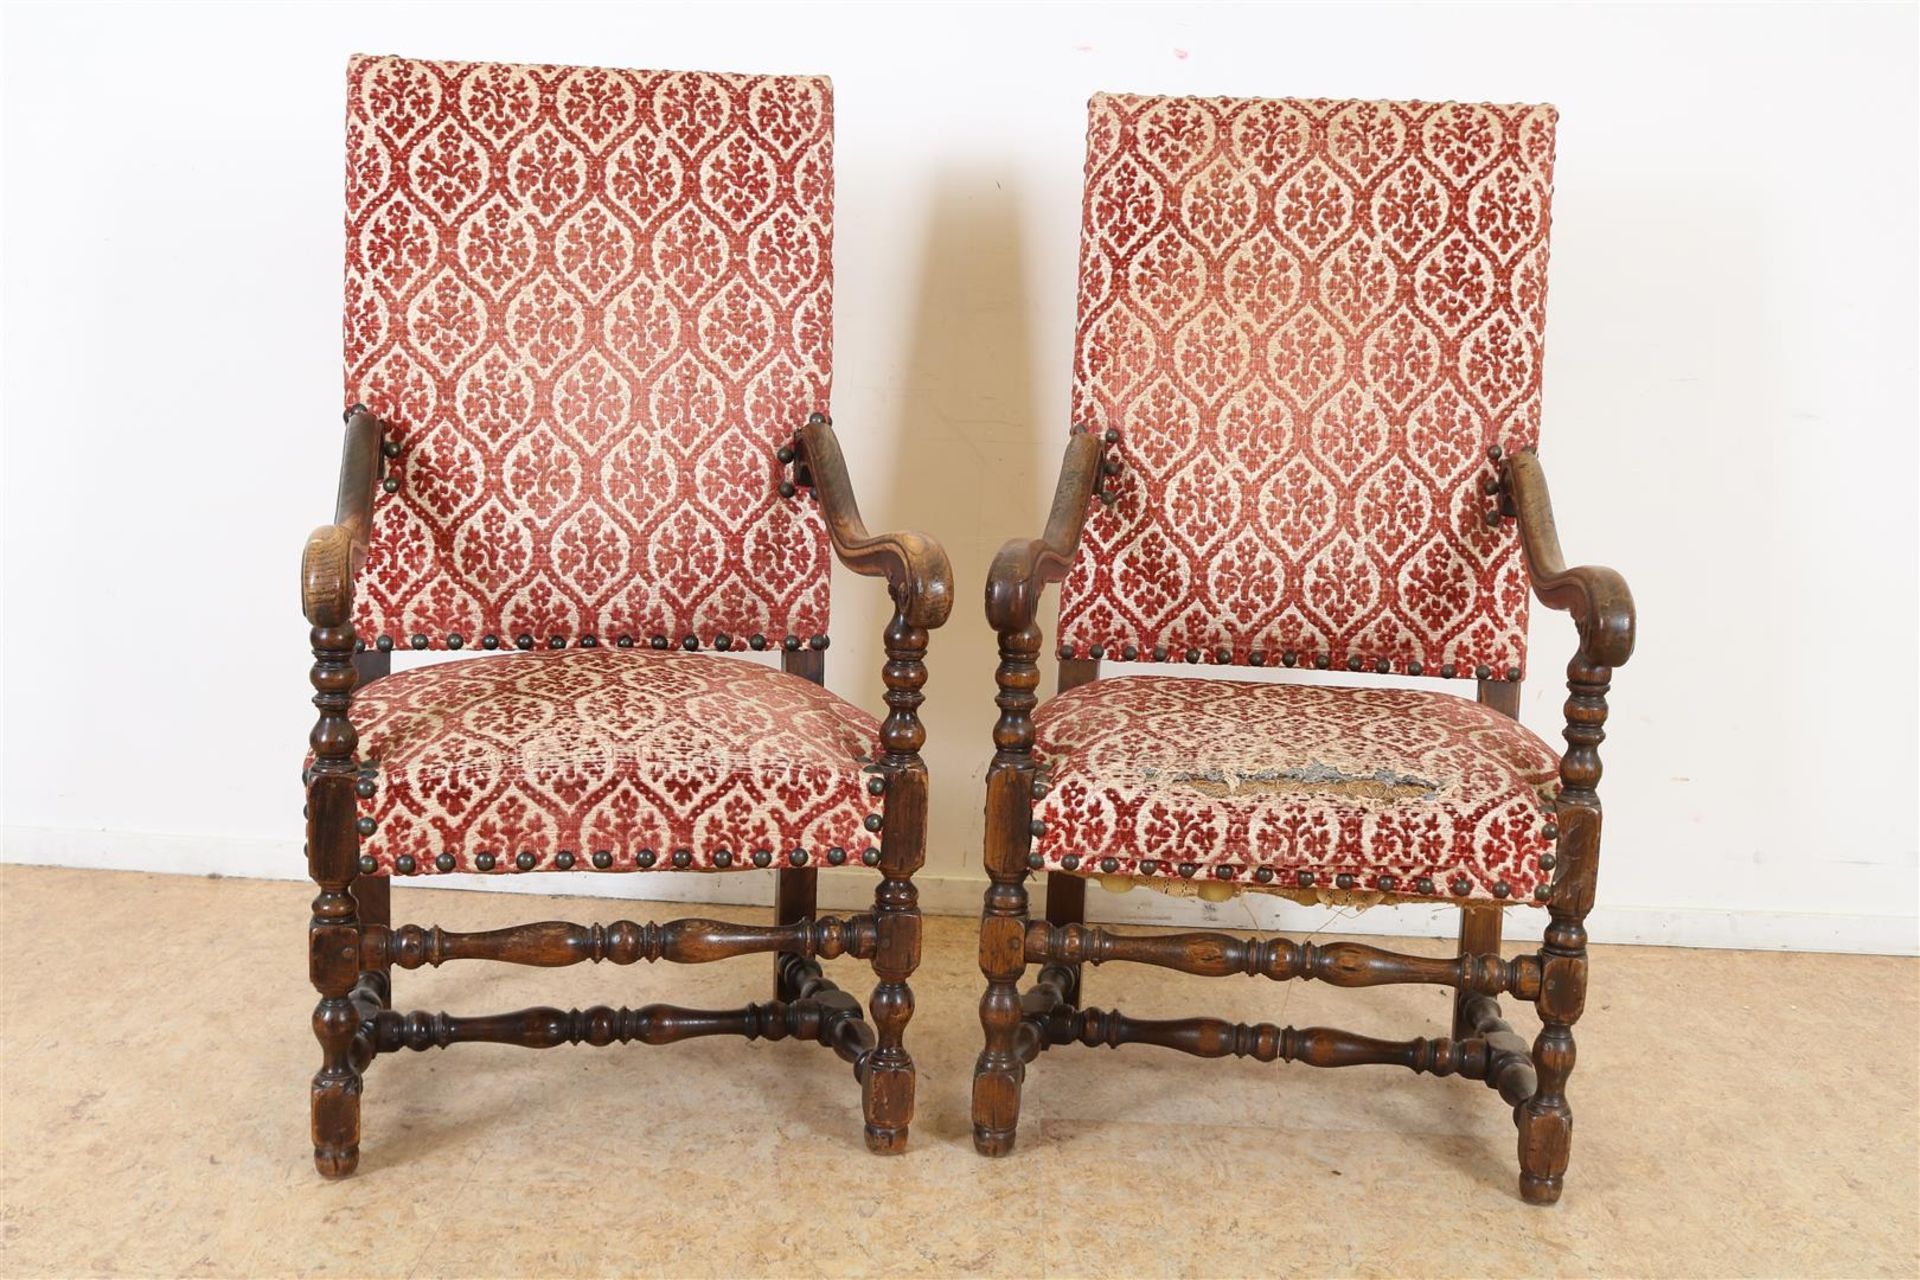 Pair of oak armchairs with carved armrests and legs